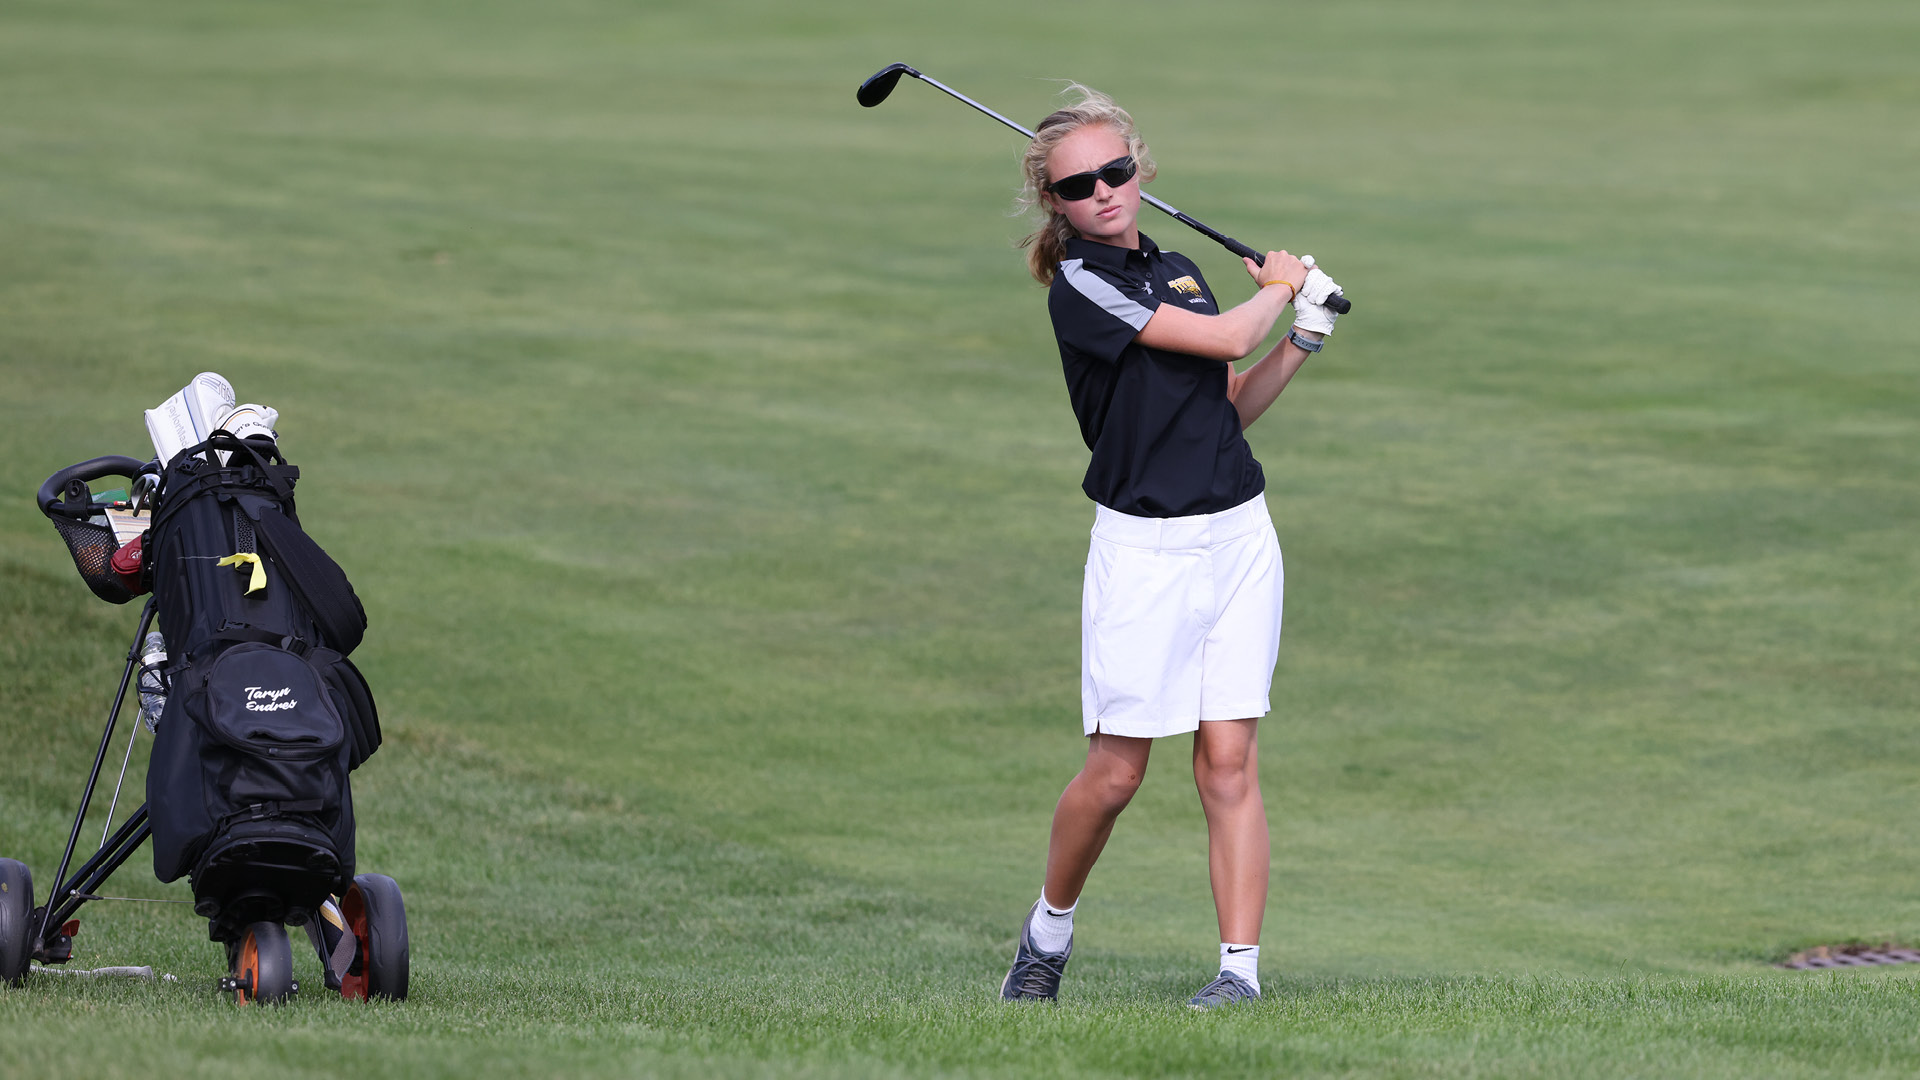 Taryn Endres shot an 80 and 89 over the two-day Division III Classic